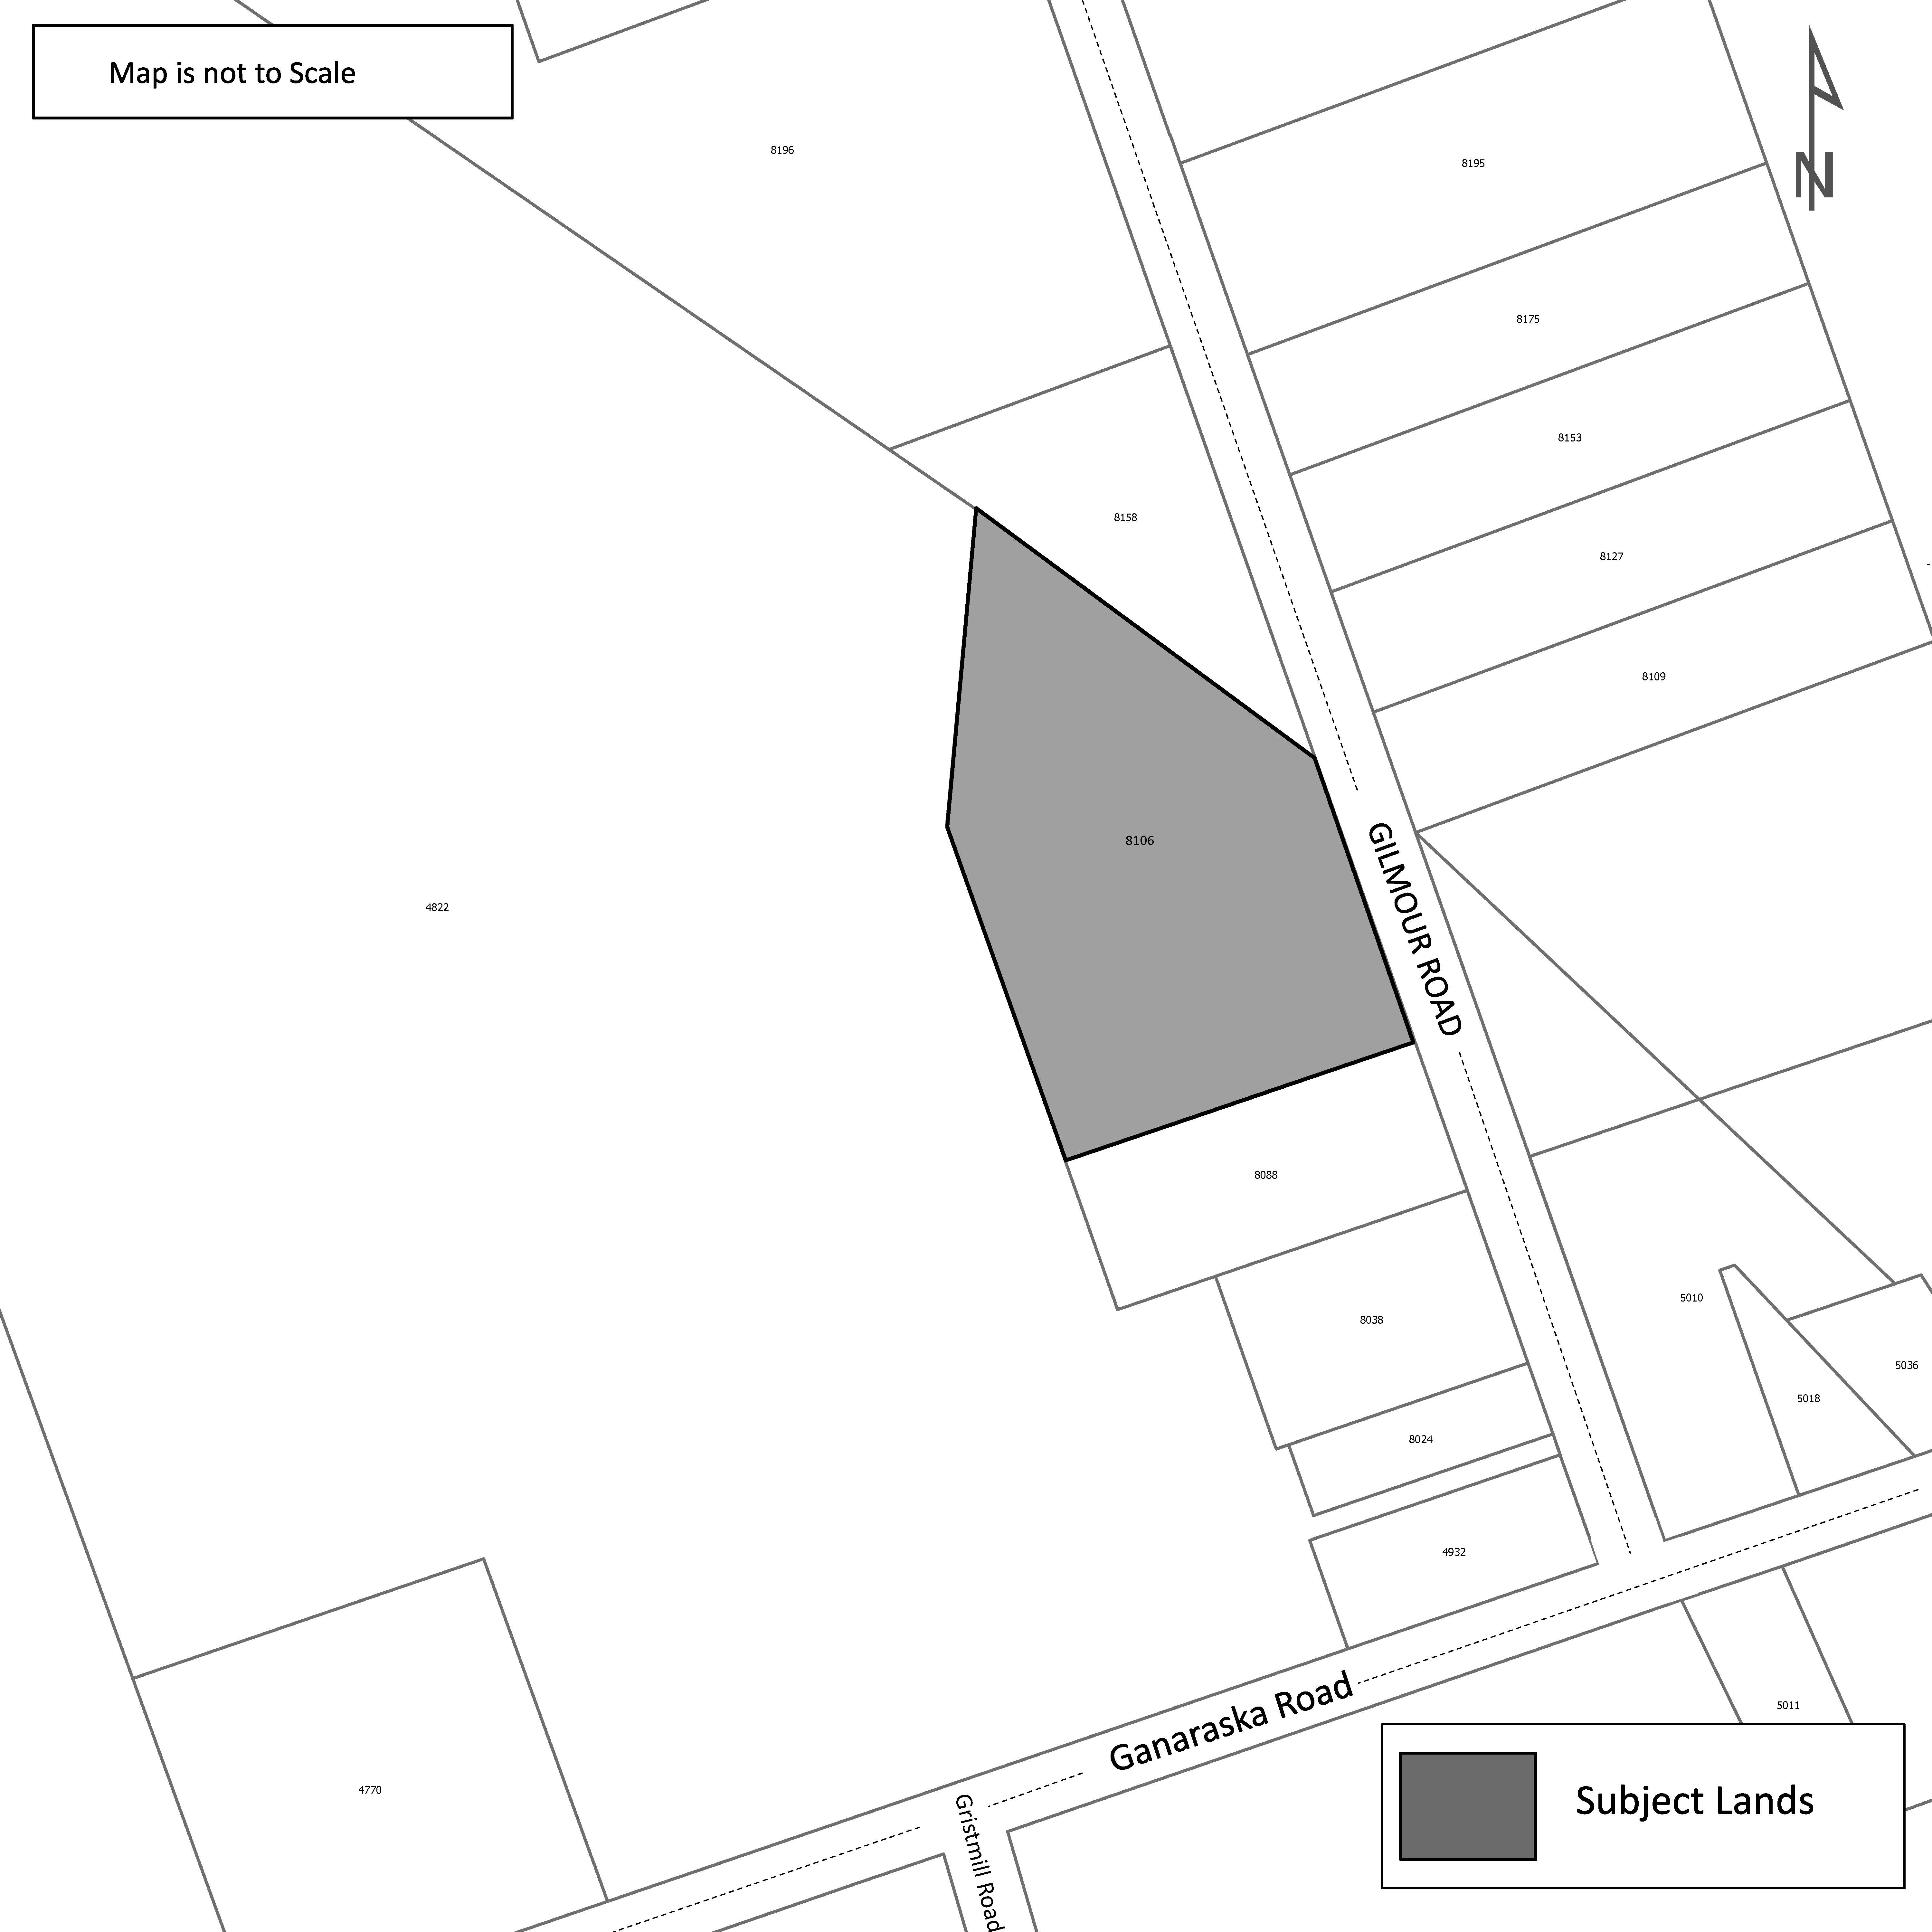 Image of subject site map Gilmour Road and Ganaraska Road